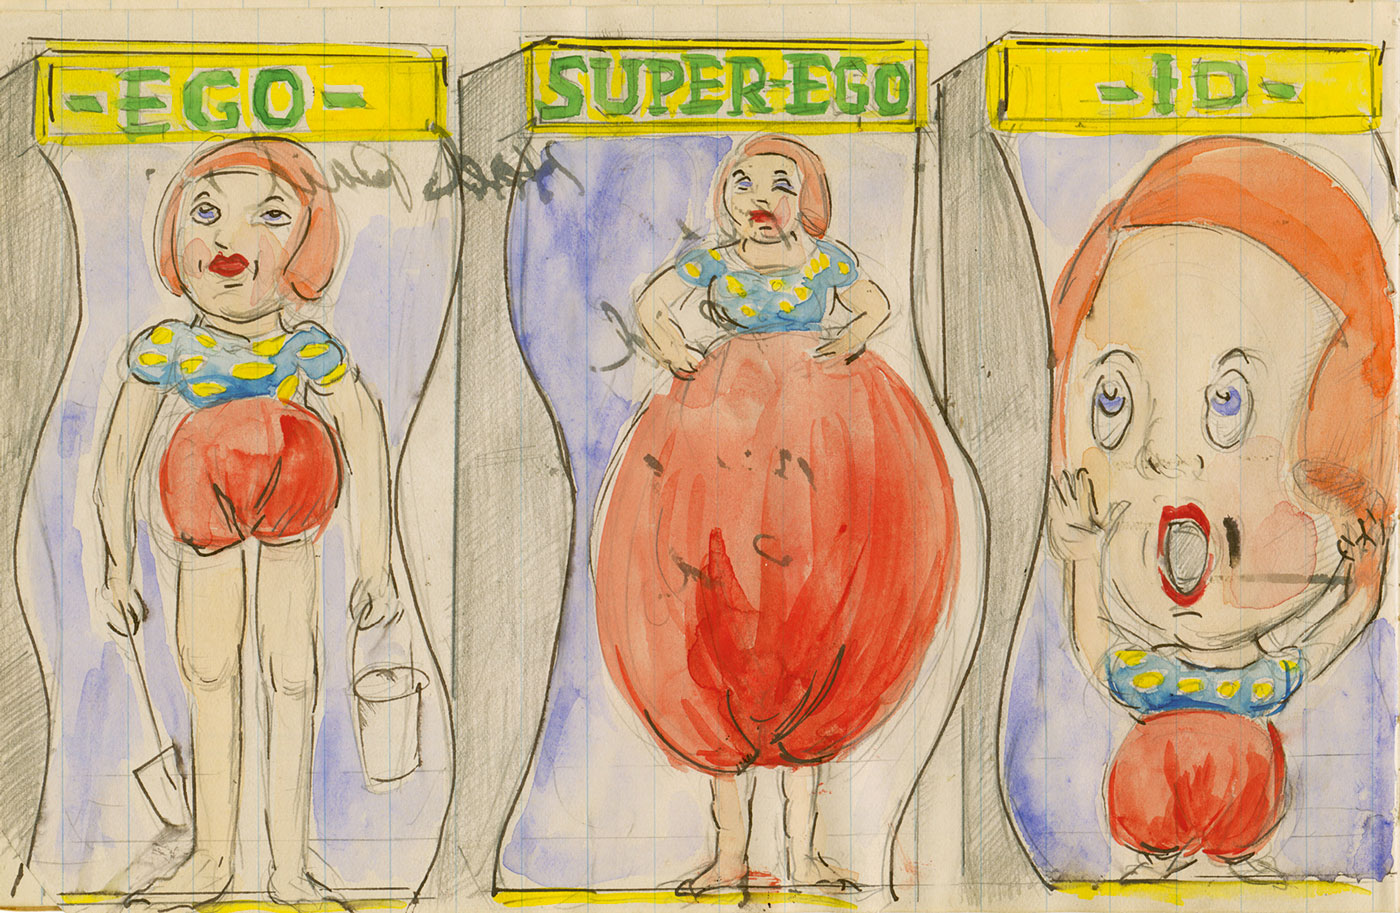 Albert Grass’s sketch for funhouse mirrors at Dreamland.